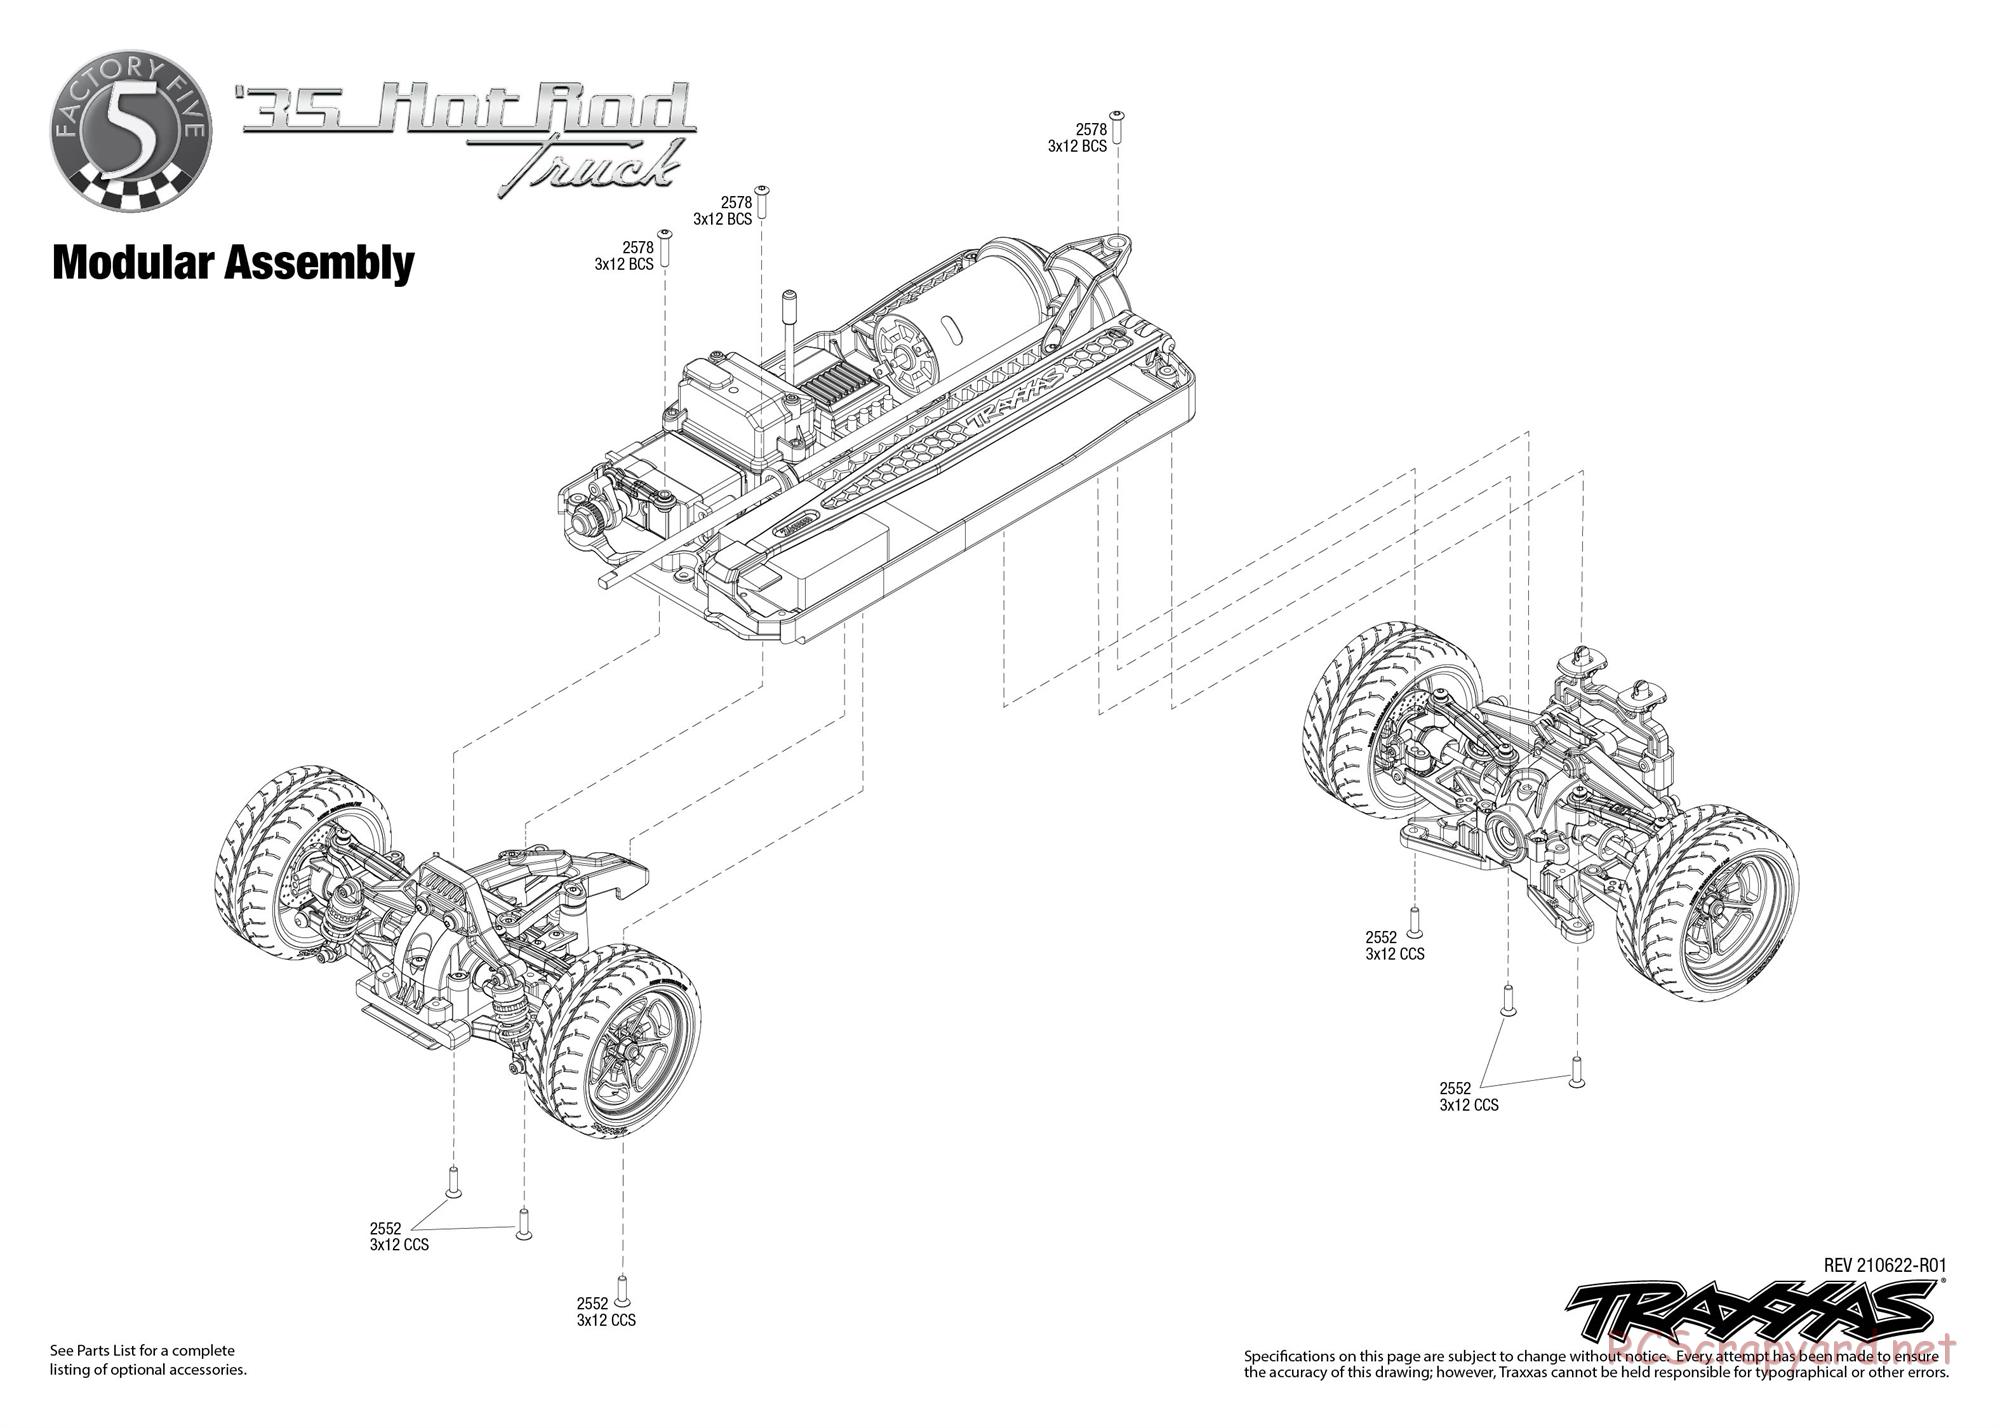 Traxxas - Hot Rod 1935 Truck (2021) - Exploded Views - Page 4